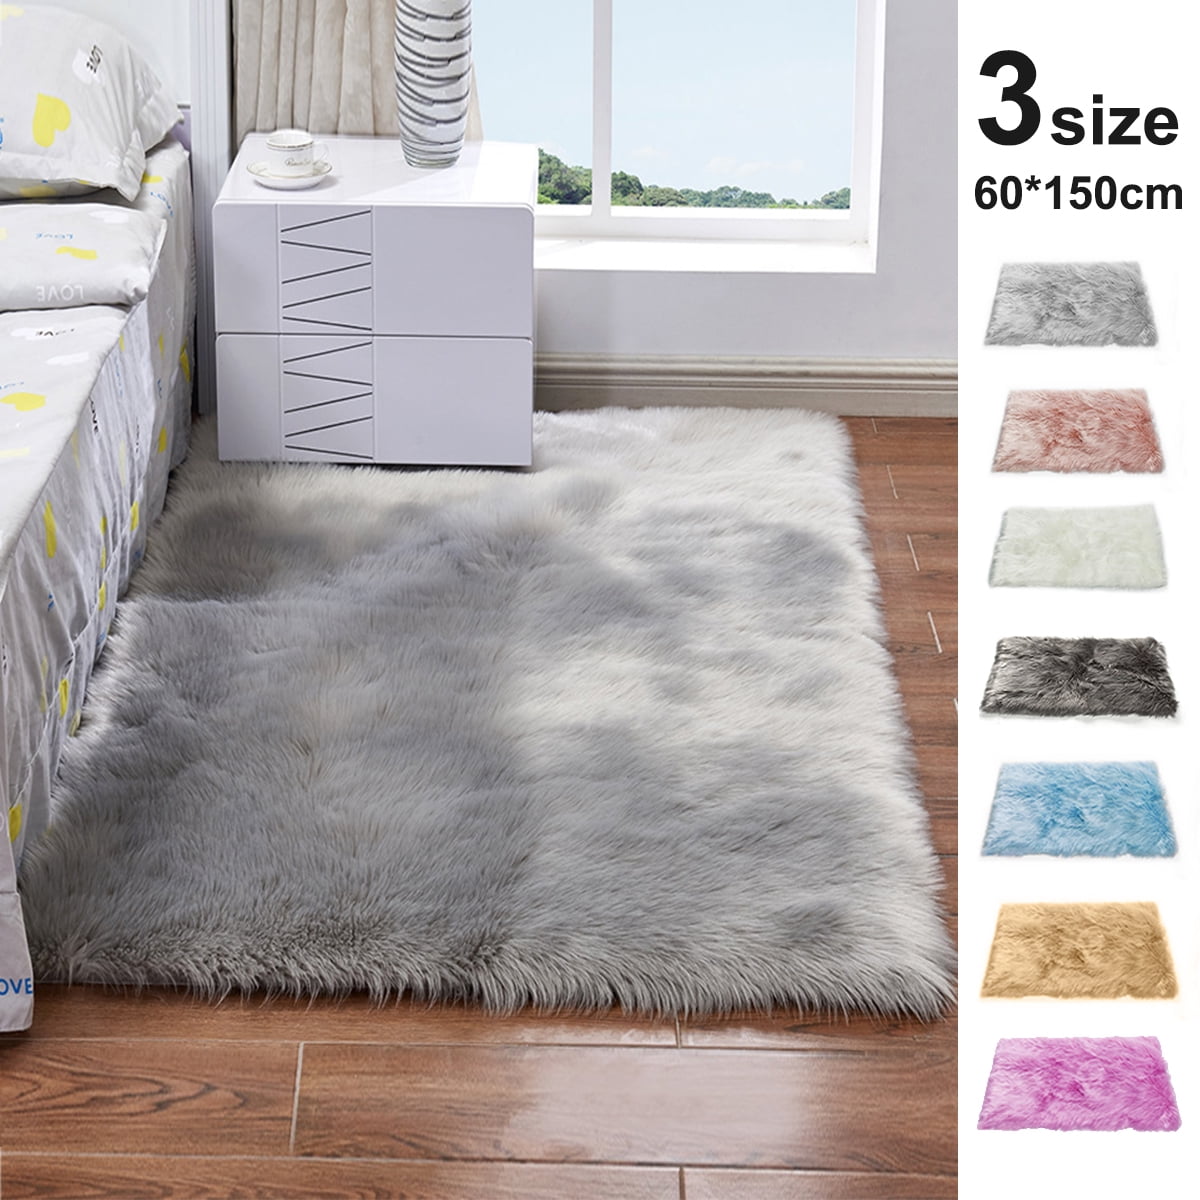 Soft Fluffy Rug Shaggy Rugs Faux Sheepskin Rugs Floor Carpet For Bedrooms Living Room Kids Rooms Decor Grey White Pink Walmart Canada